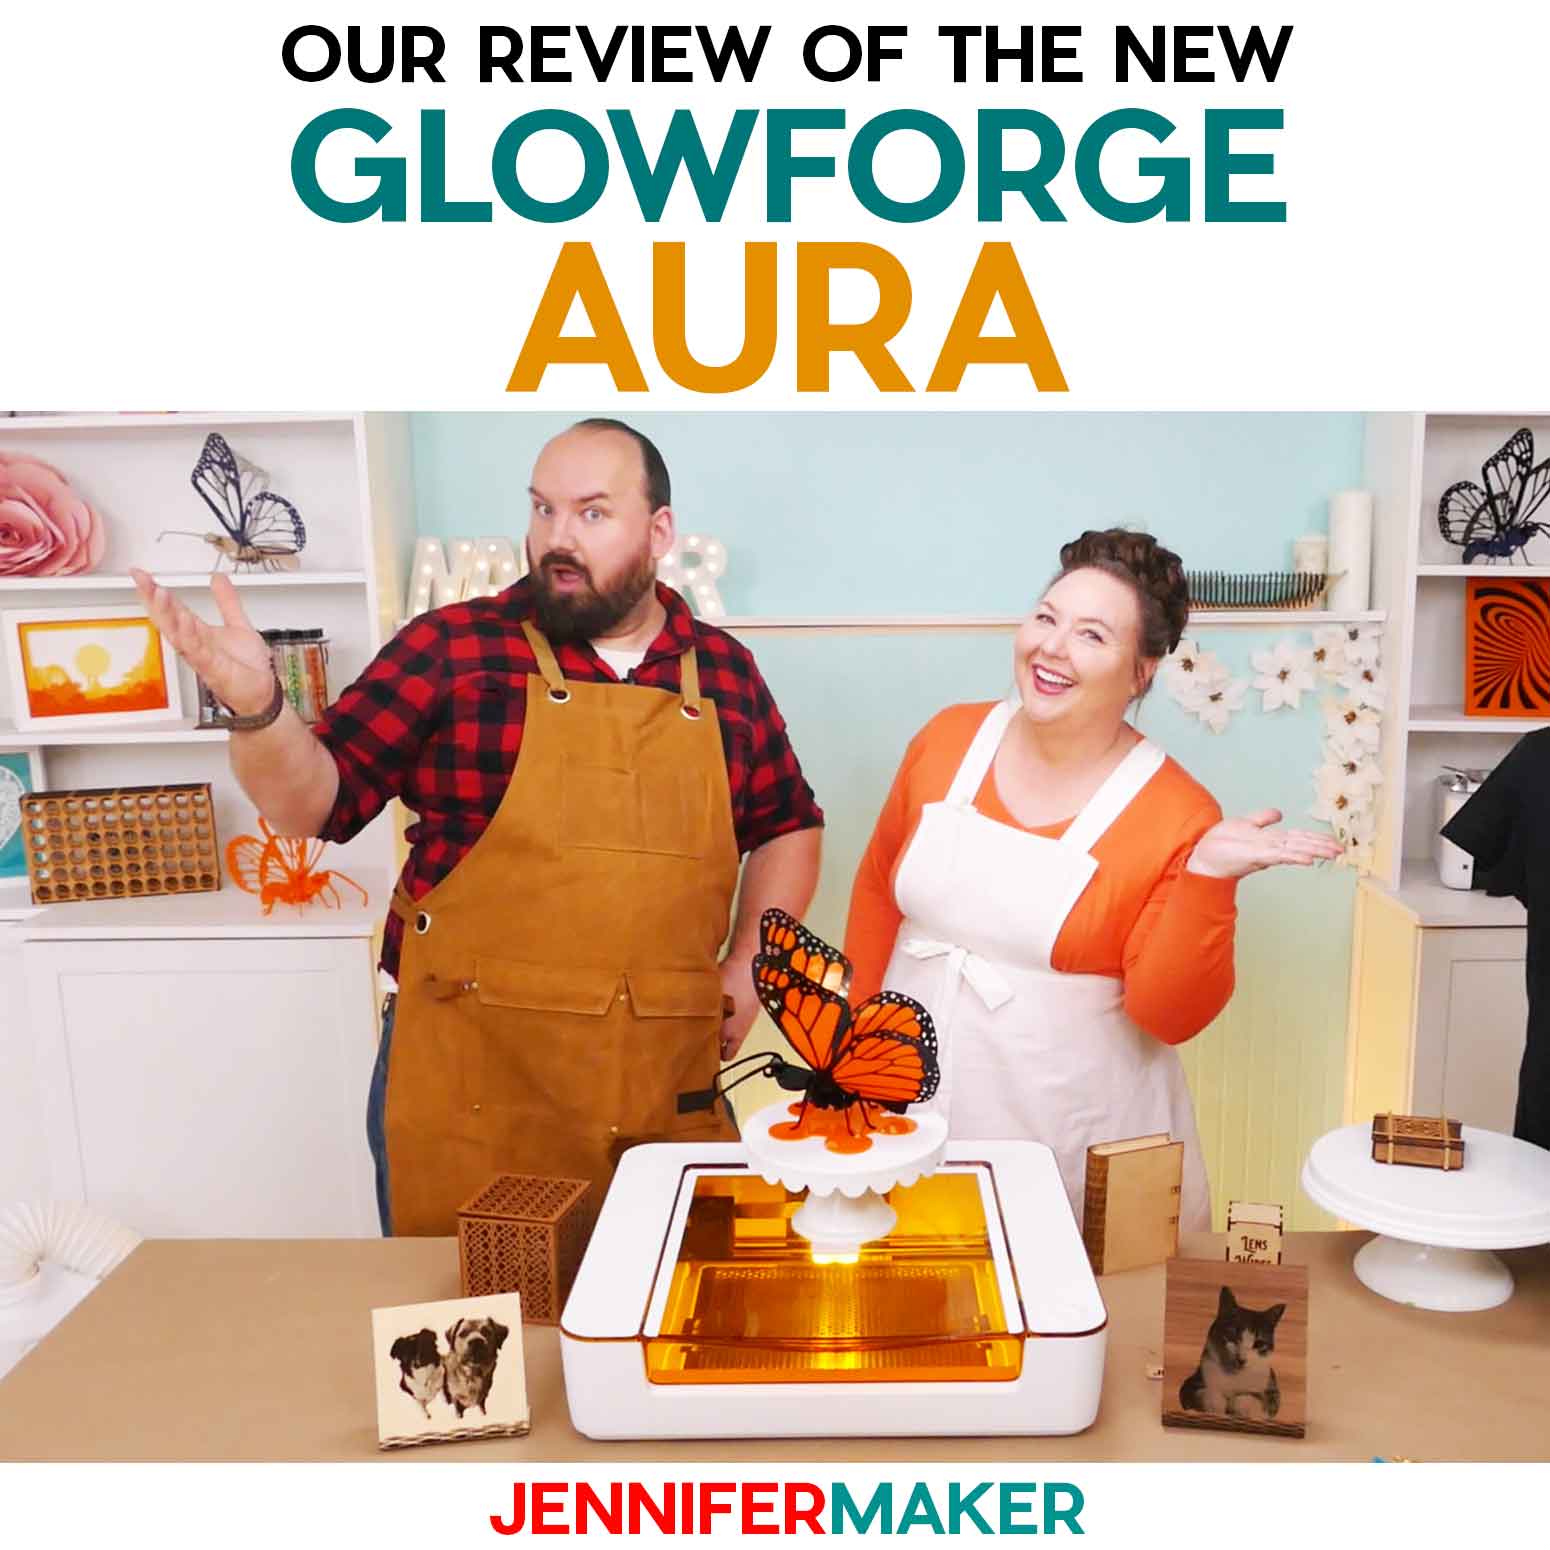 Glowforge Aura Craft Laser Review from JenniferMaker